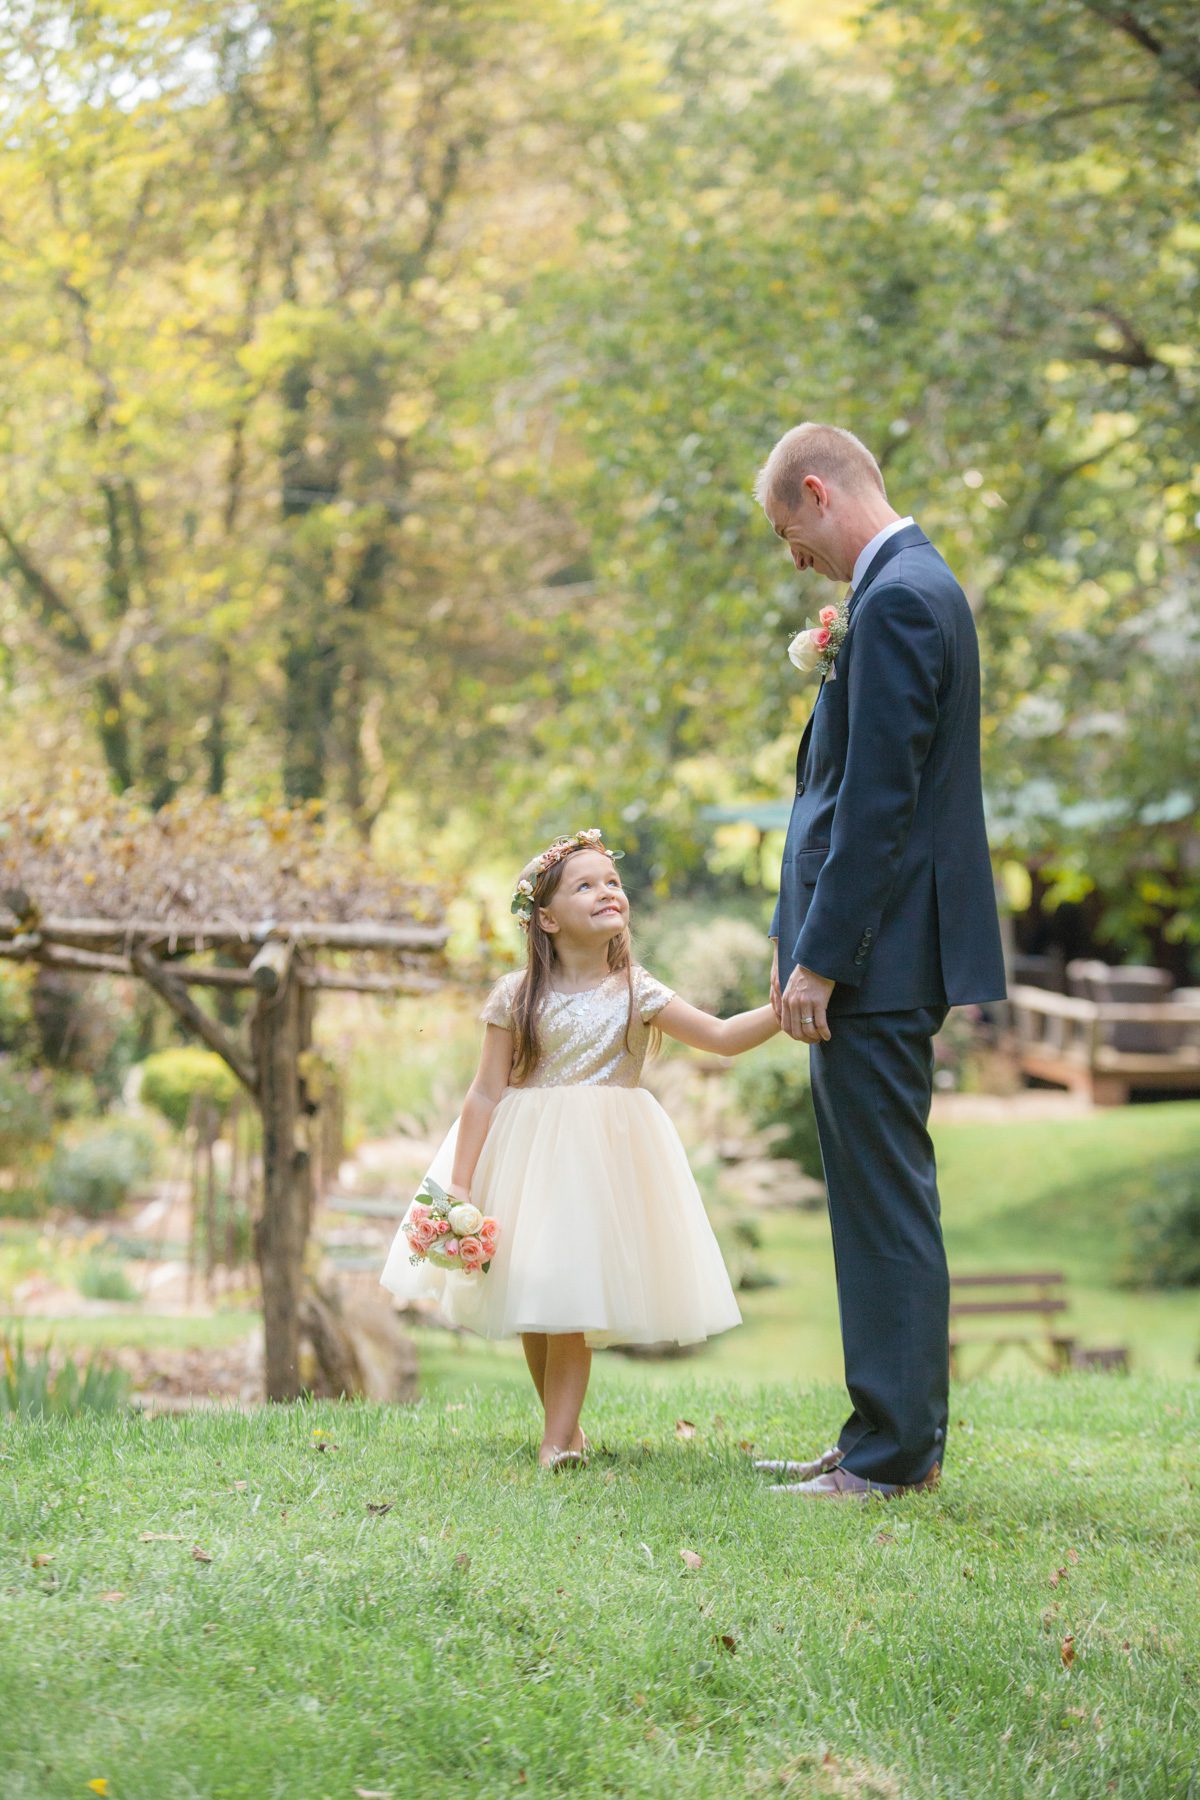 Groom and flower girl at Butterfly Hollow wedding in Gordonsville, TN / Photography by Krista Lee